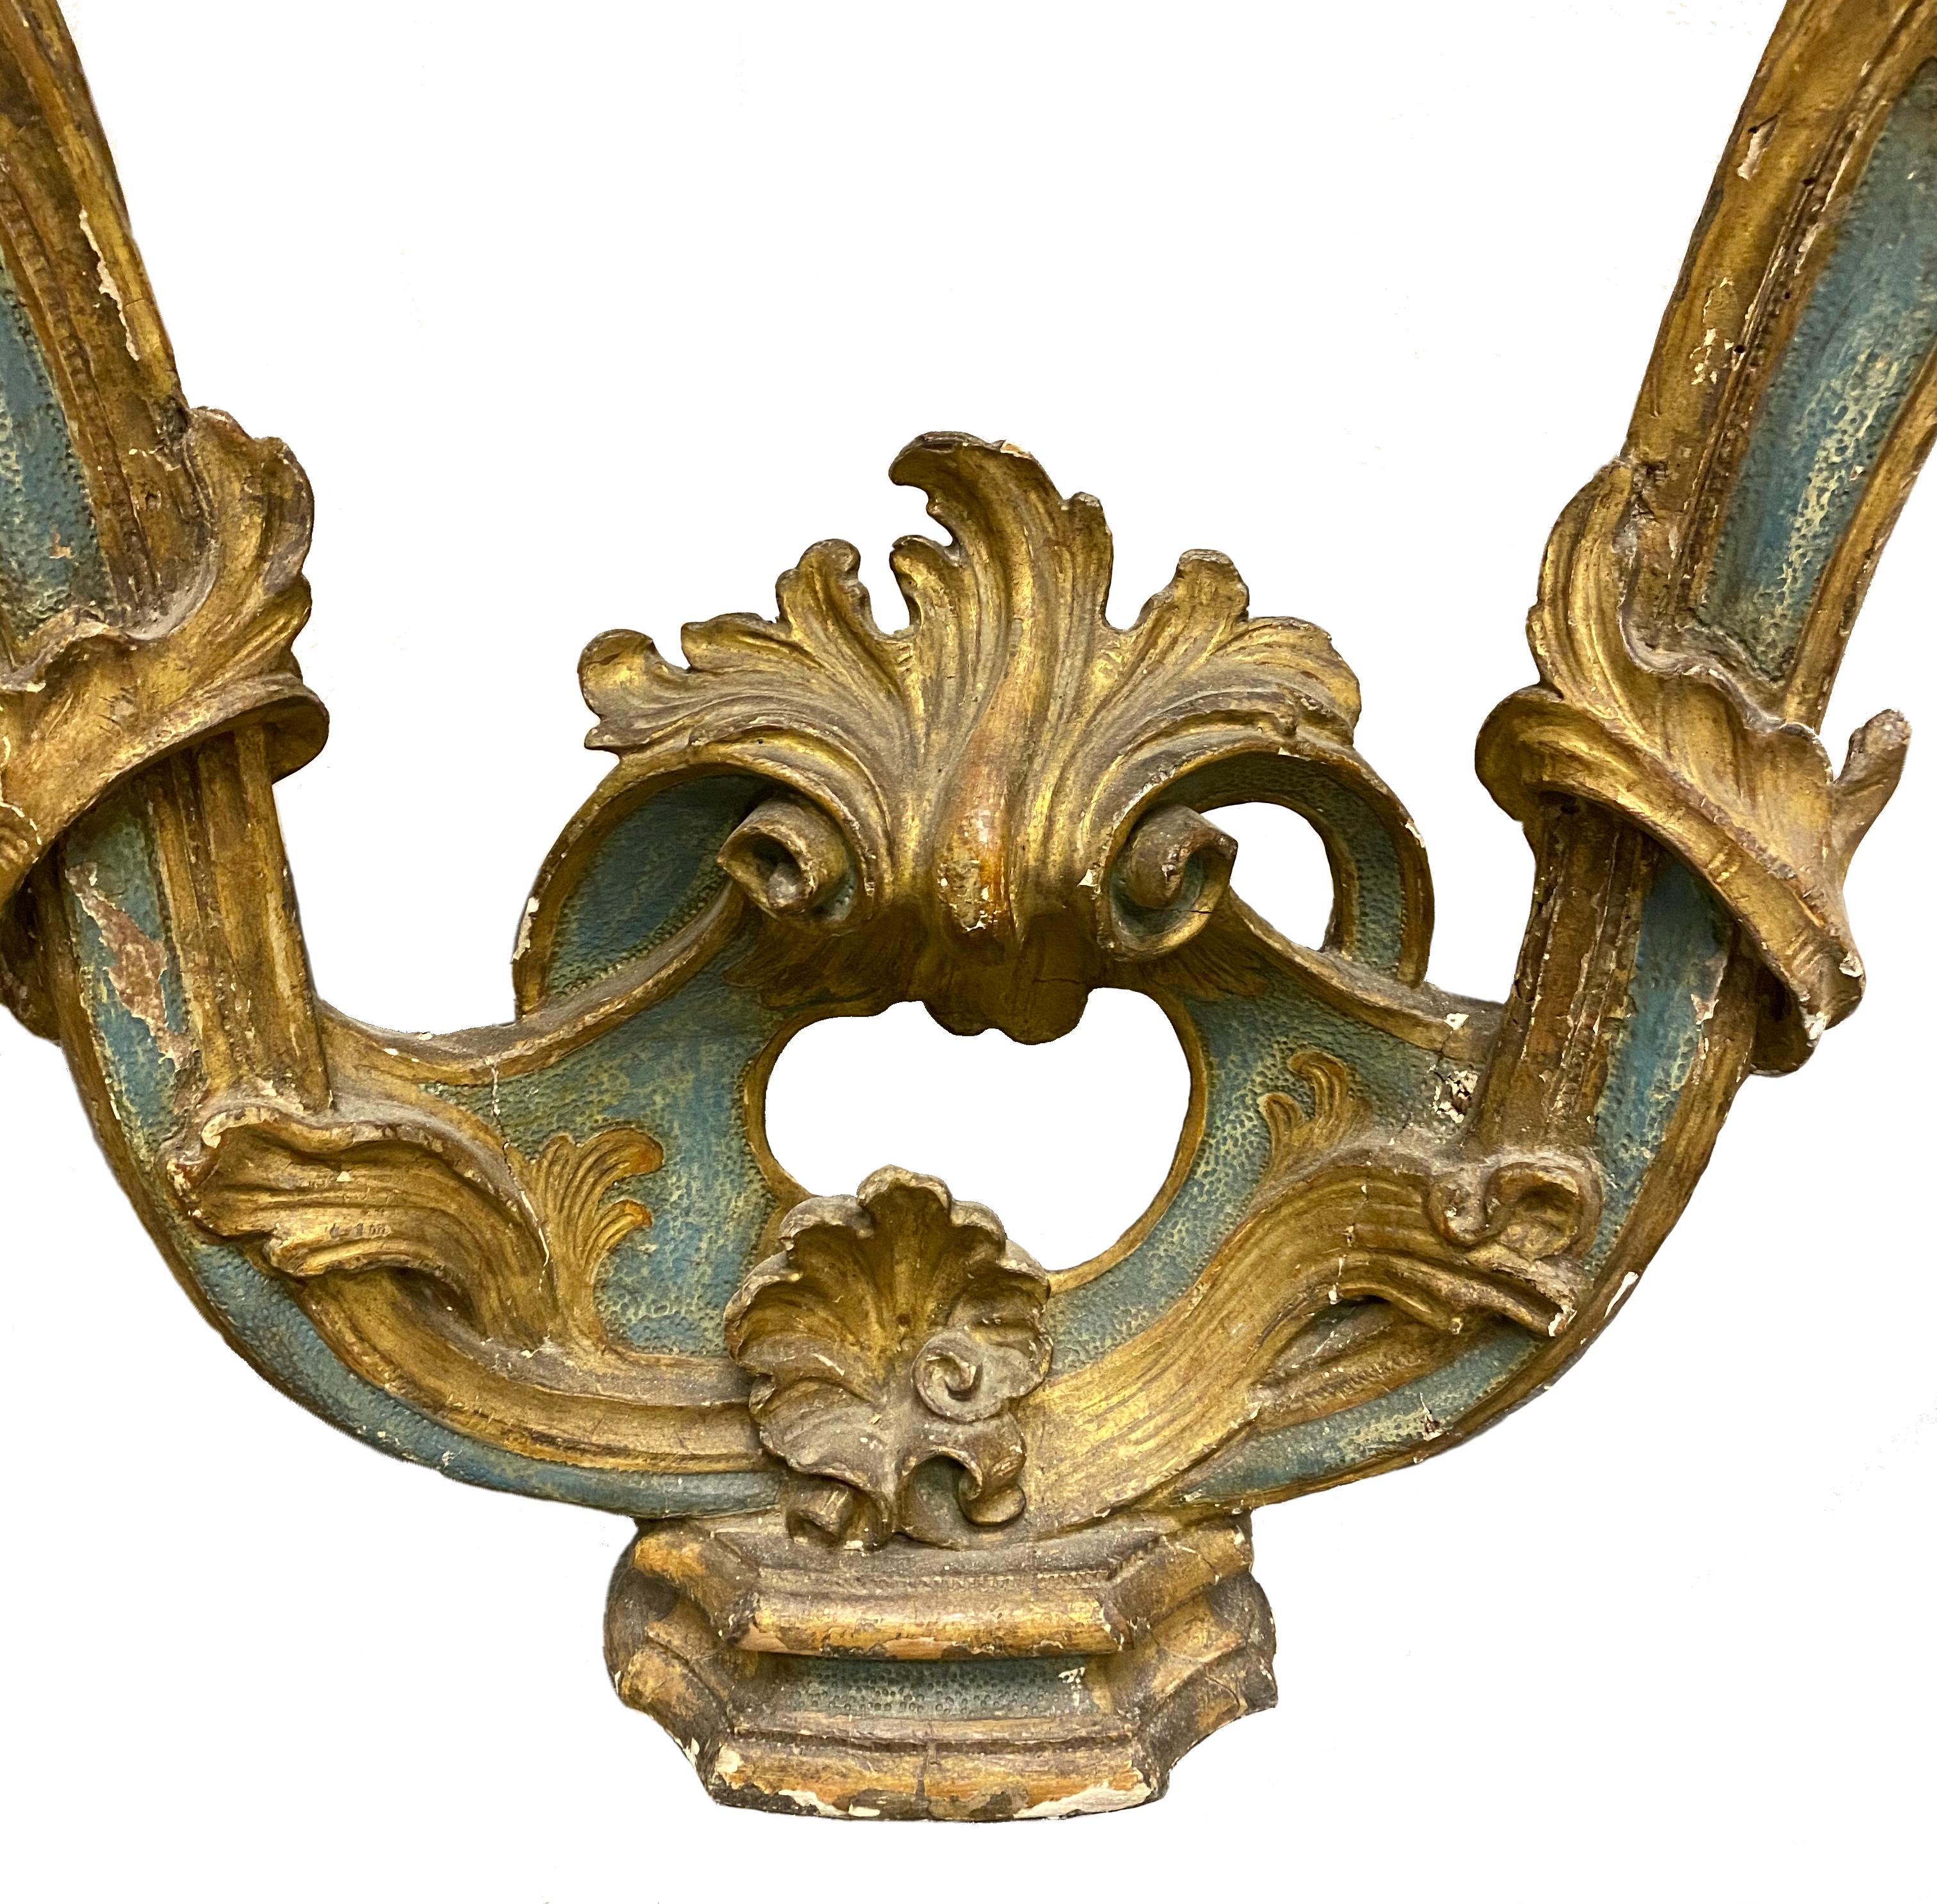 Hand-Carved 18th Century Carved Italian Green and Gilt Wall Mount Console with Putti